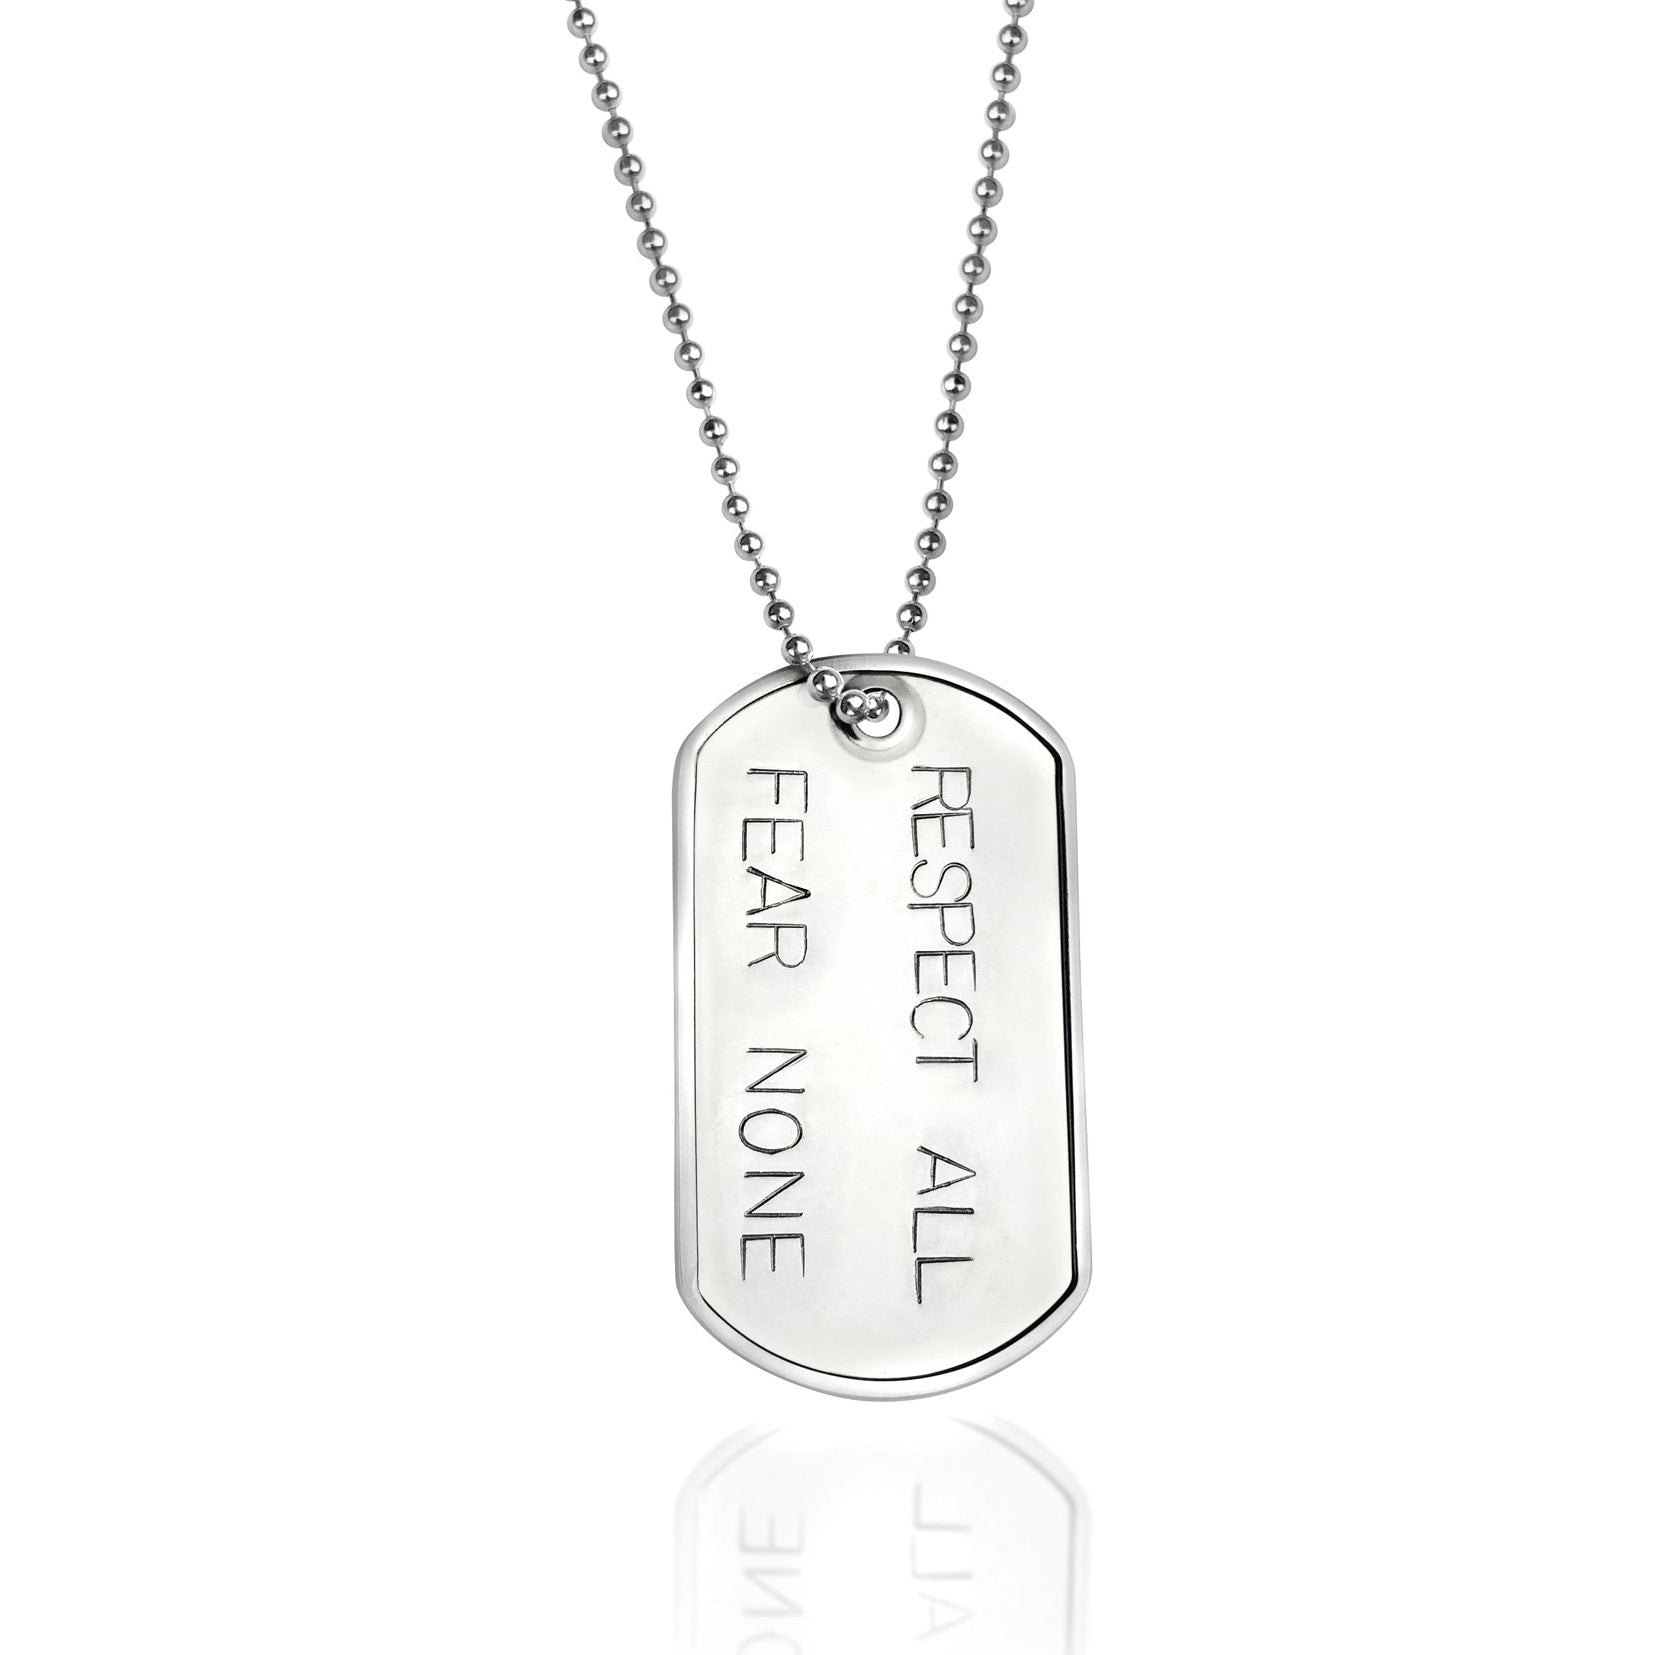 Respect All, Fear None - Stainless Steel Dog Tag Necklace